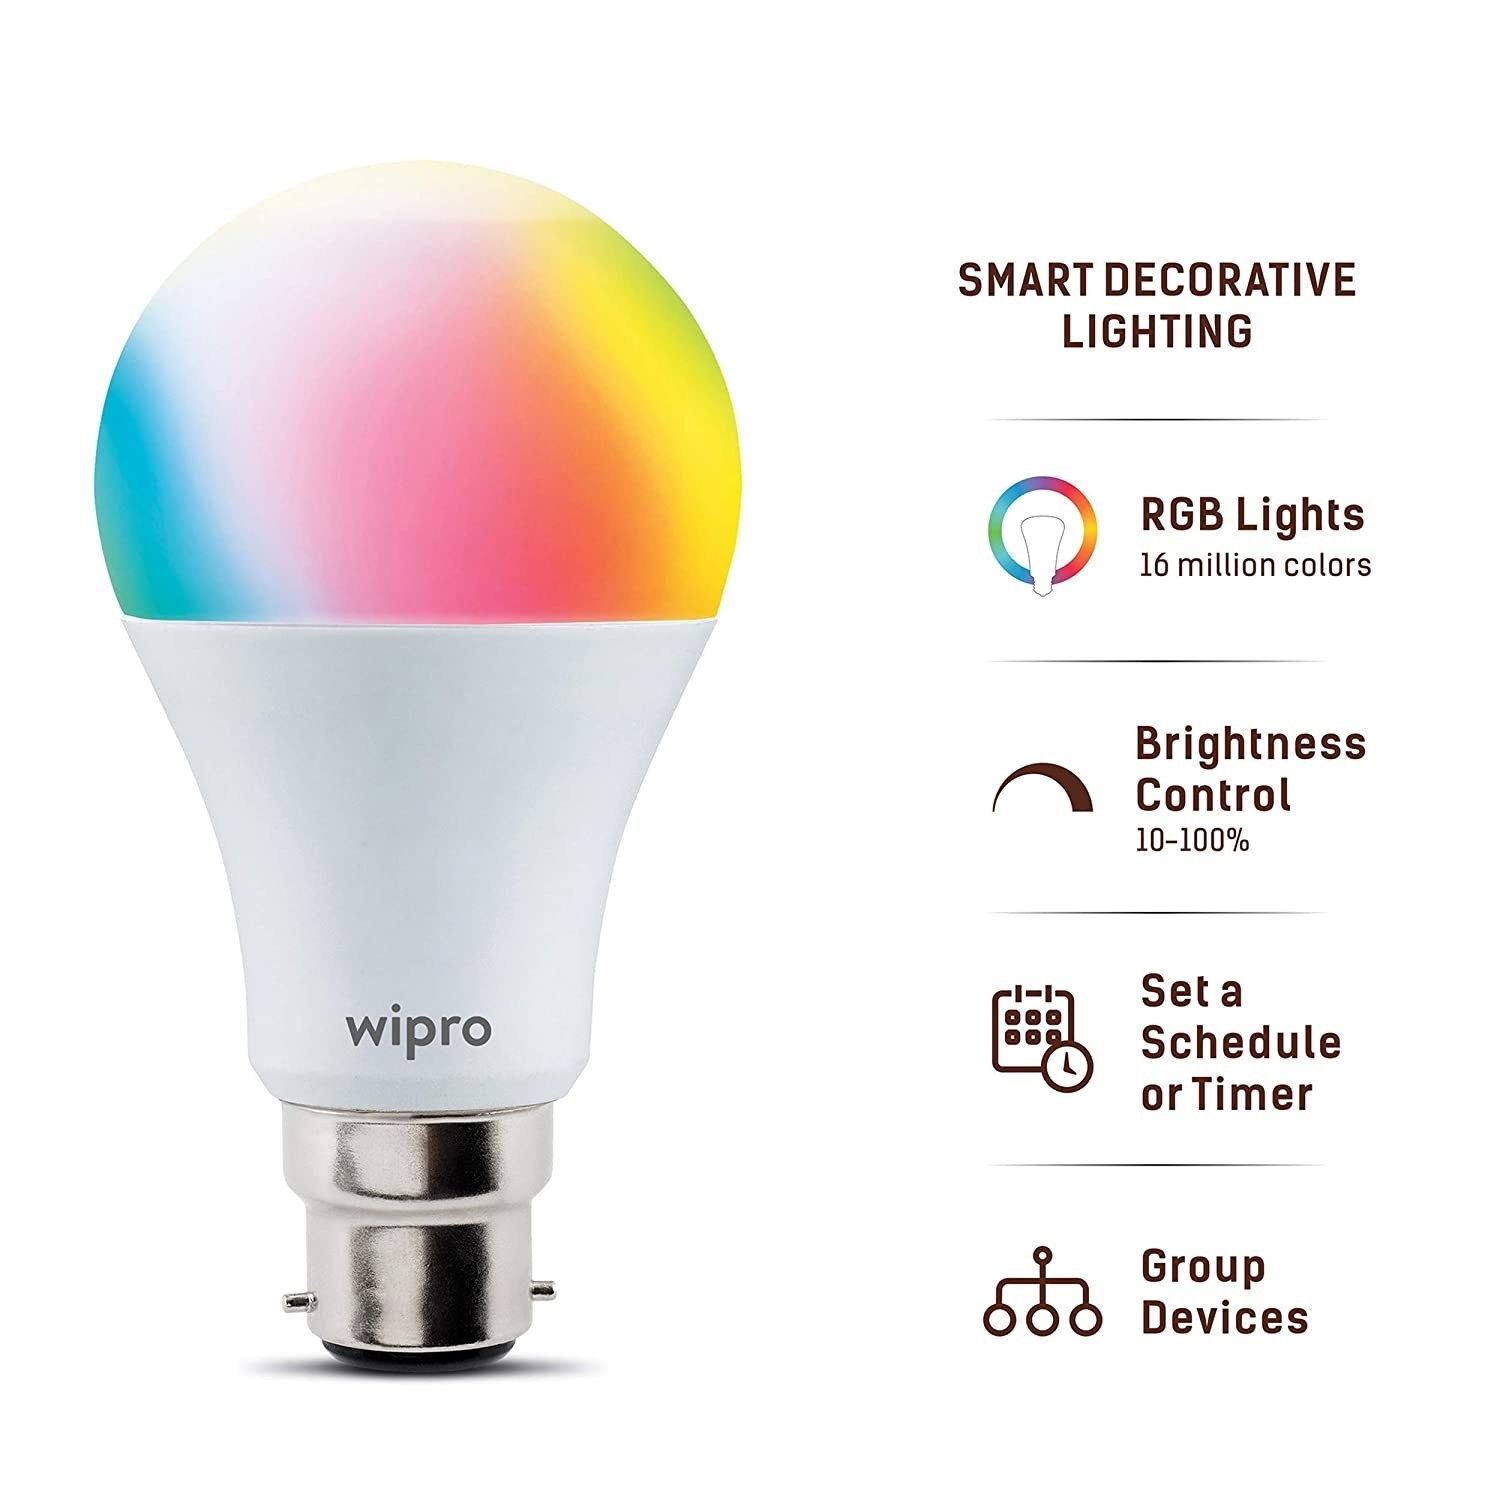 A Wipro smart bulb with various features listed alongside, such as brightness control and scheduled timer options